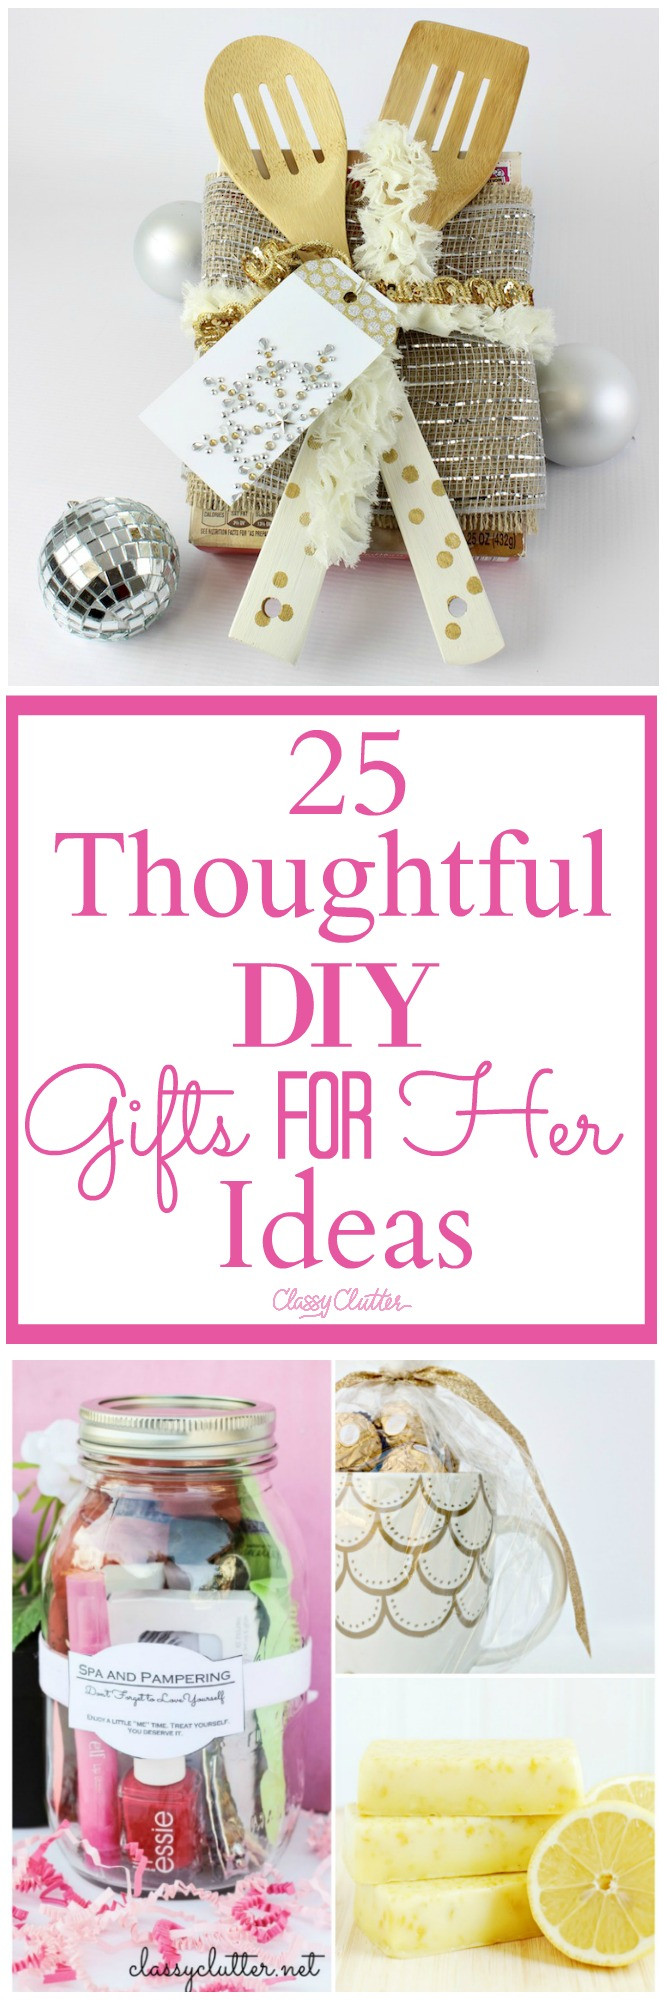 DIY Gift For Her
 25 Thoughtful DIY Gifts for Her Ideas Classy Clutter